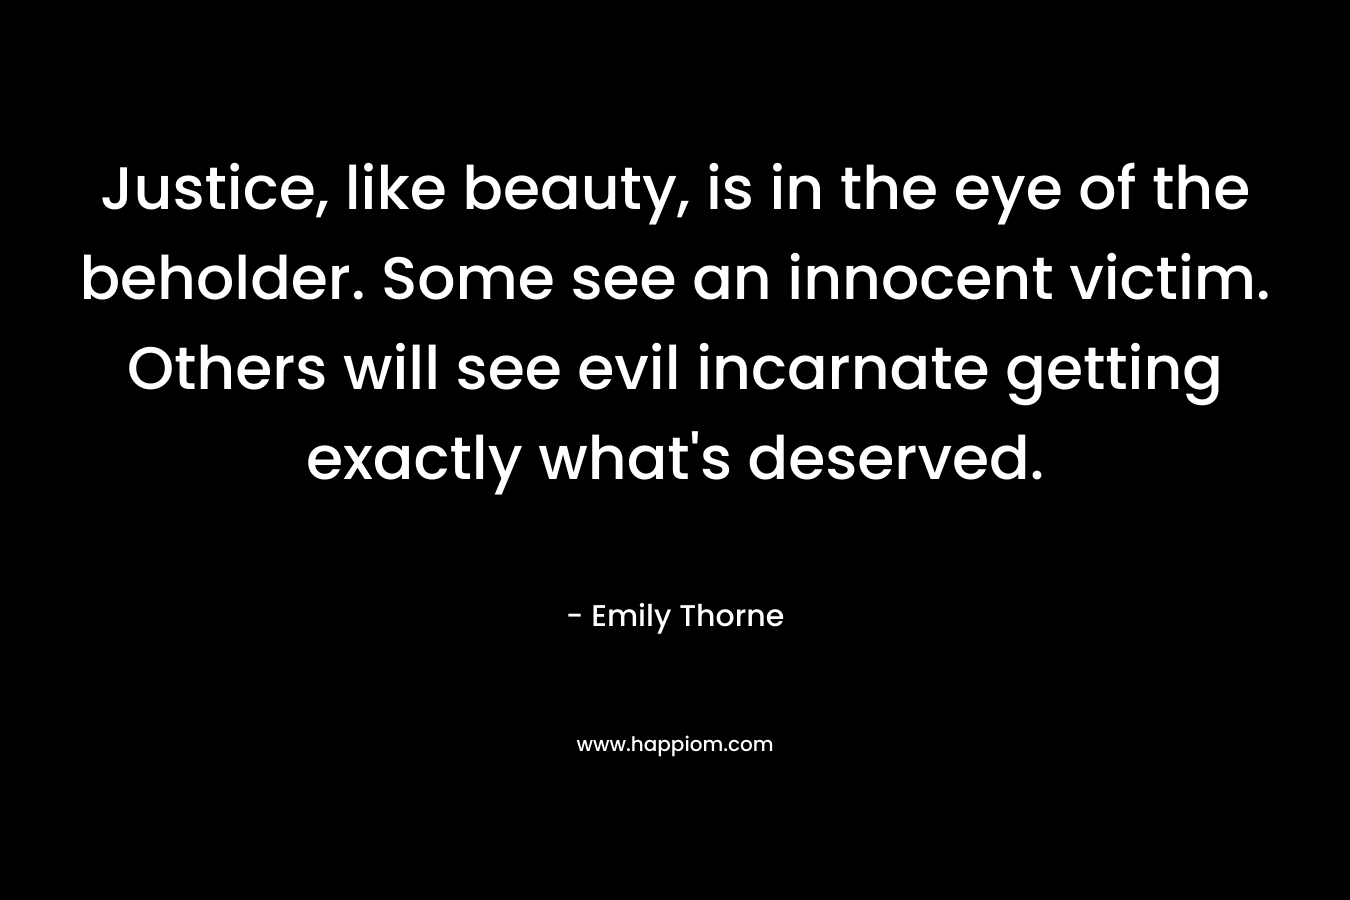 Justice, like beauty, is in the eye of the beholder. Some see an innocent victim. Others will see evil incarnate getting exactly what’s deserved. – Emily Thorne